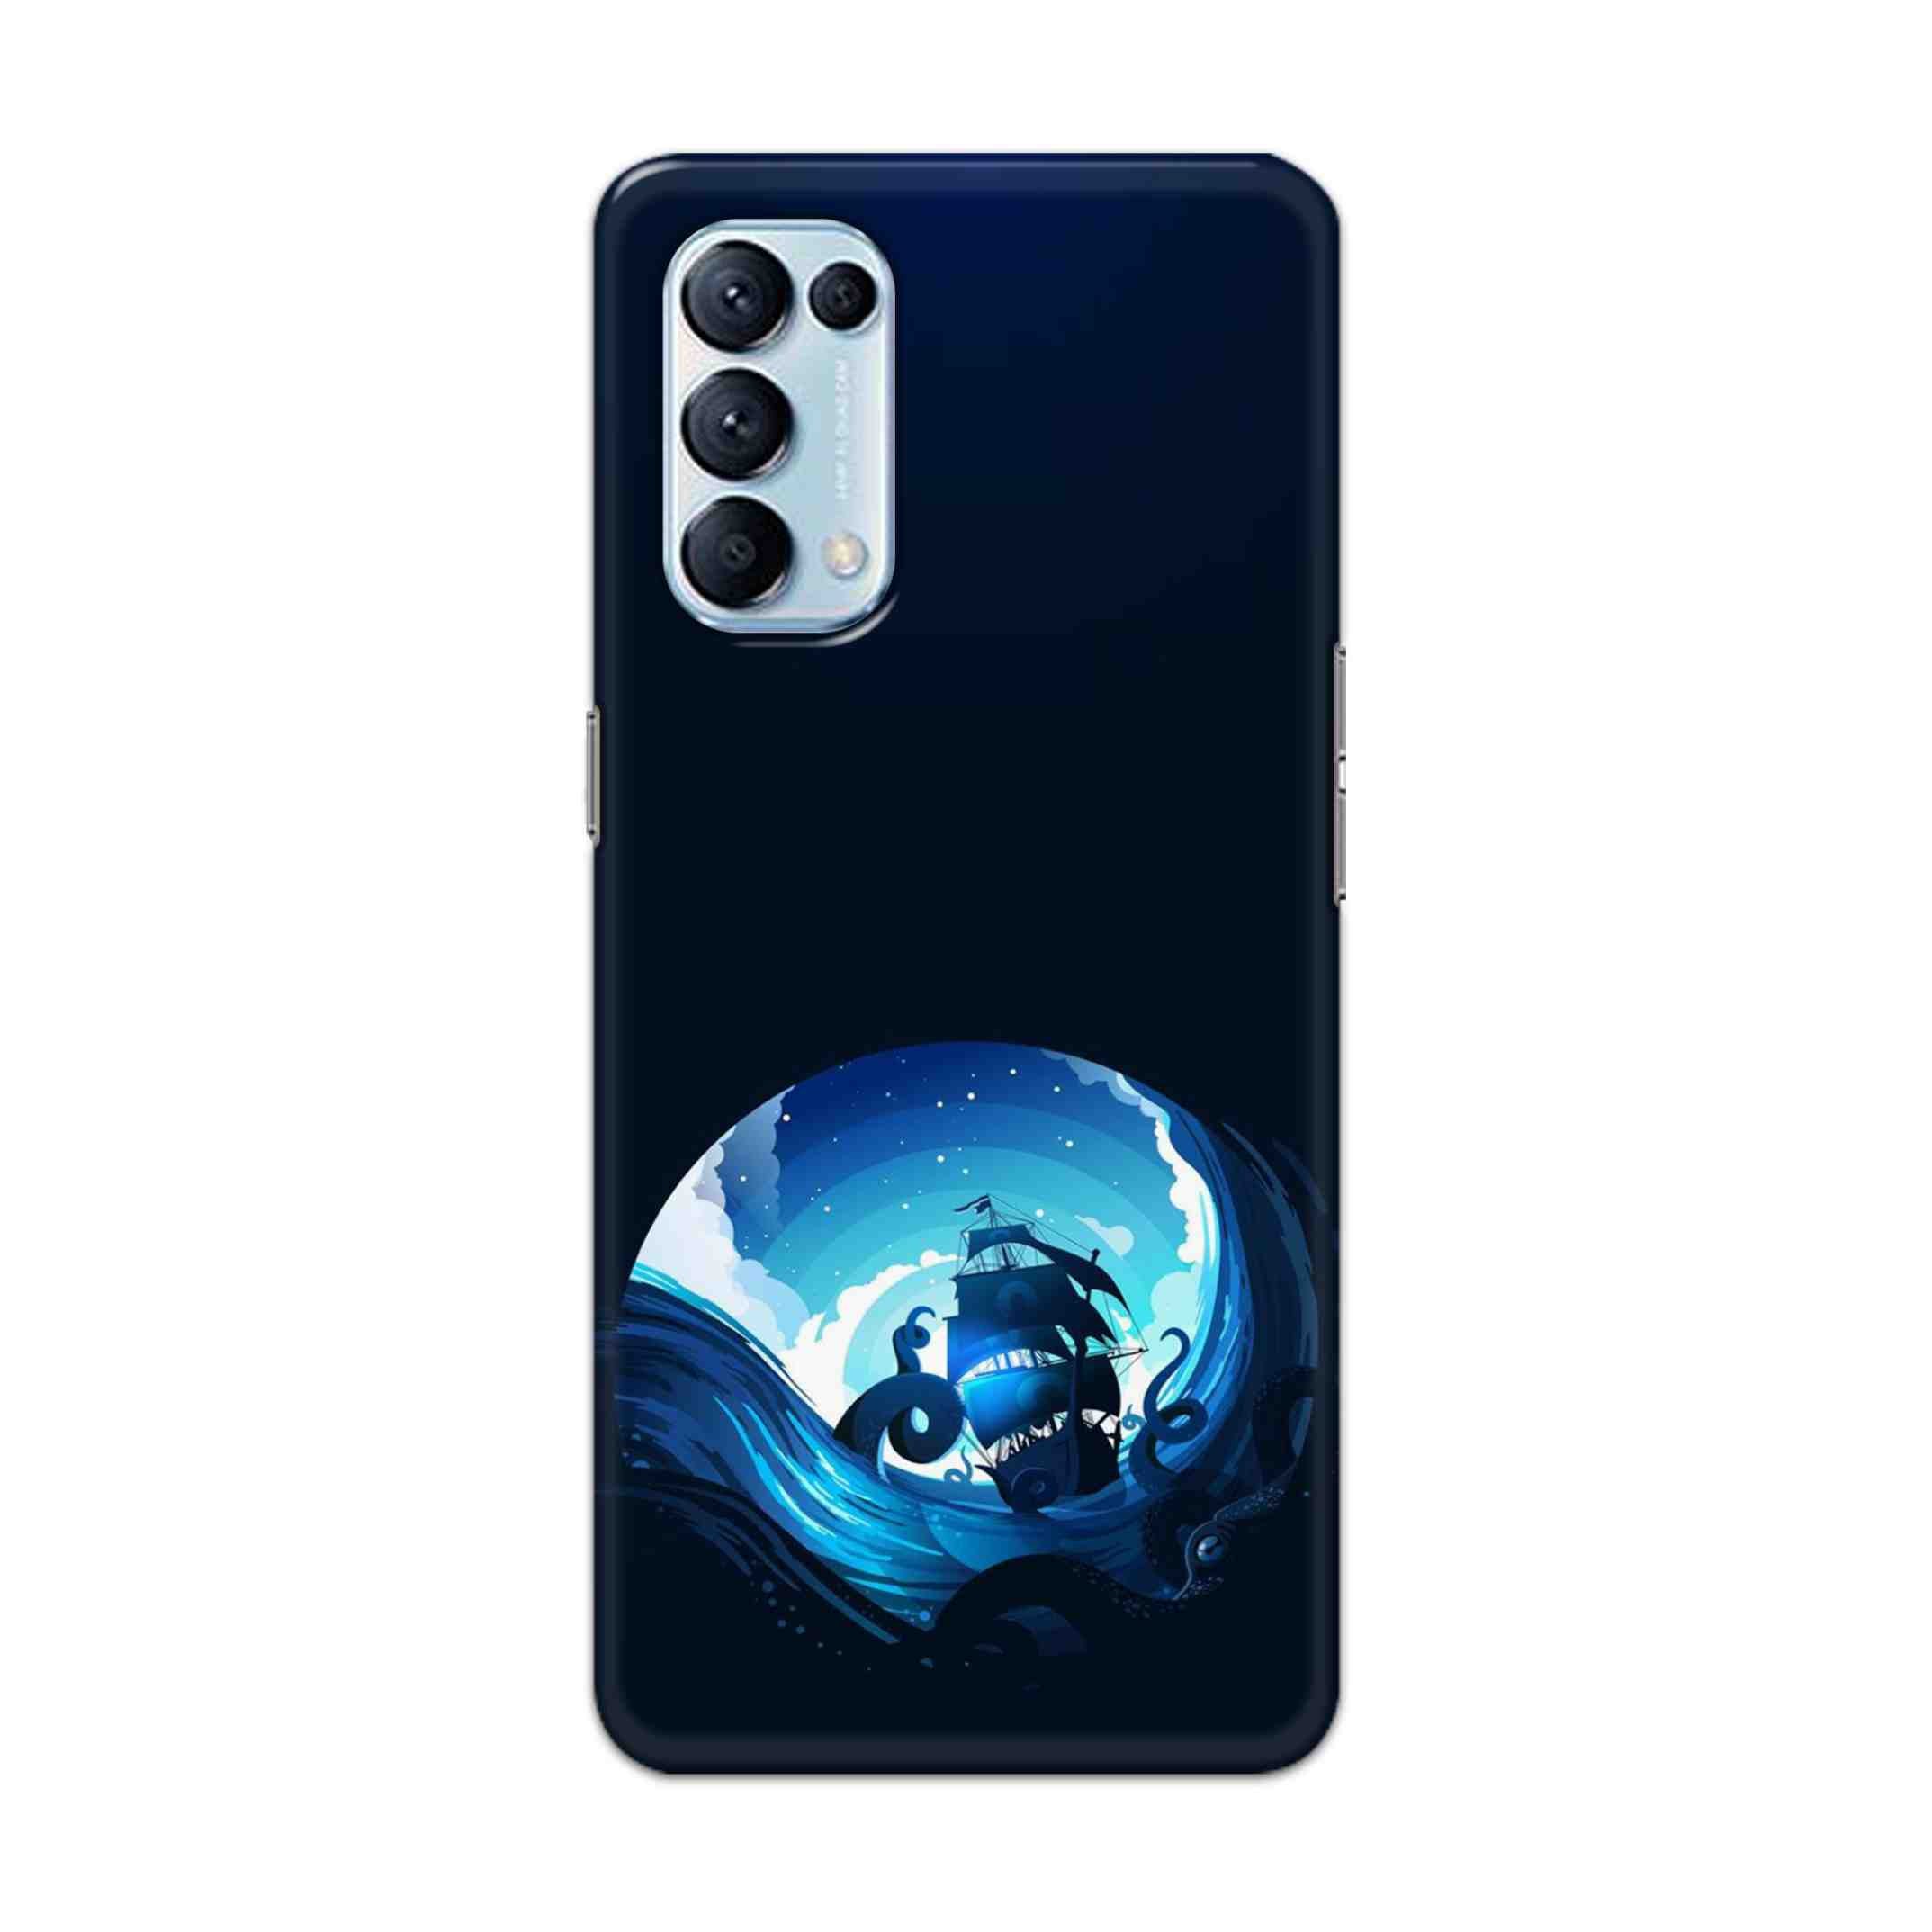 Buy Blue Sea Ship Hard Back Mobile Phone Case Cover For Oppo Reno 5 Pro 5G Online